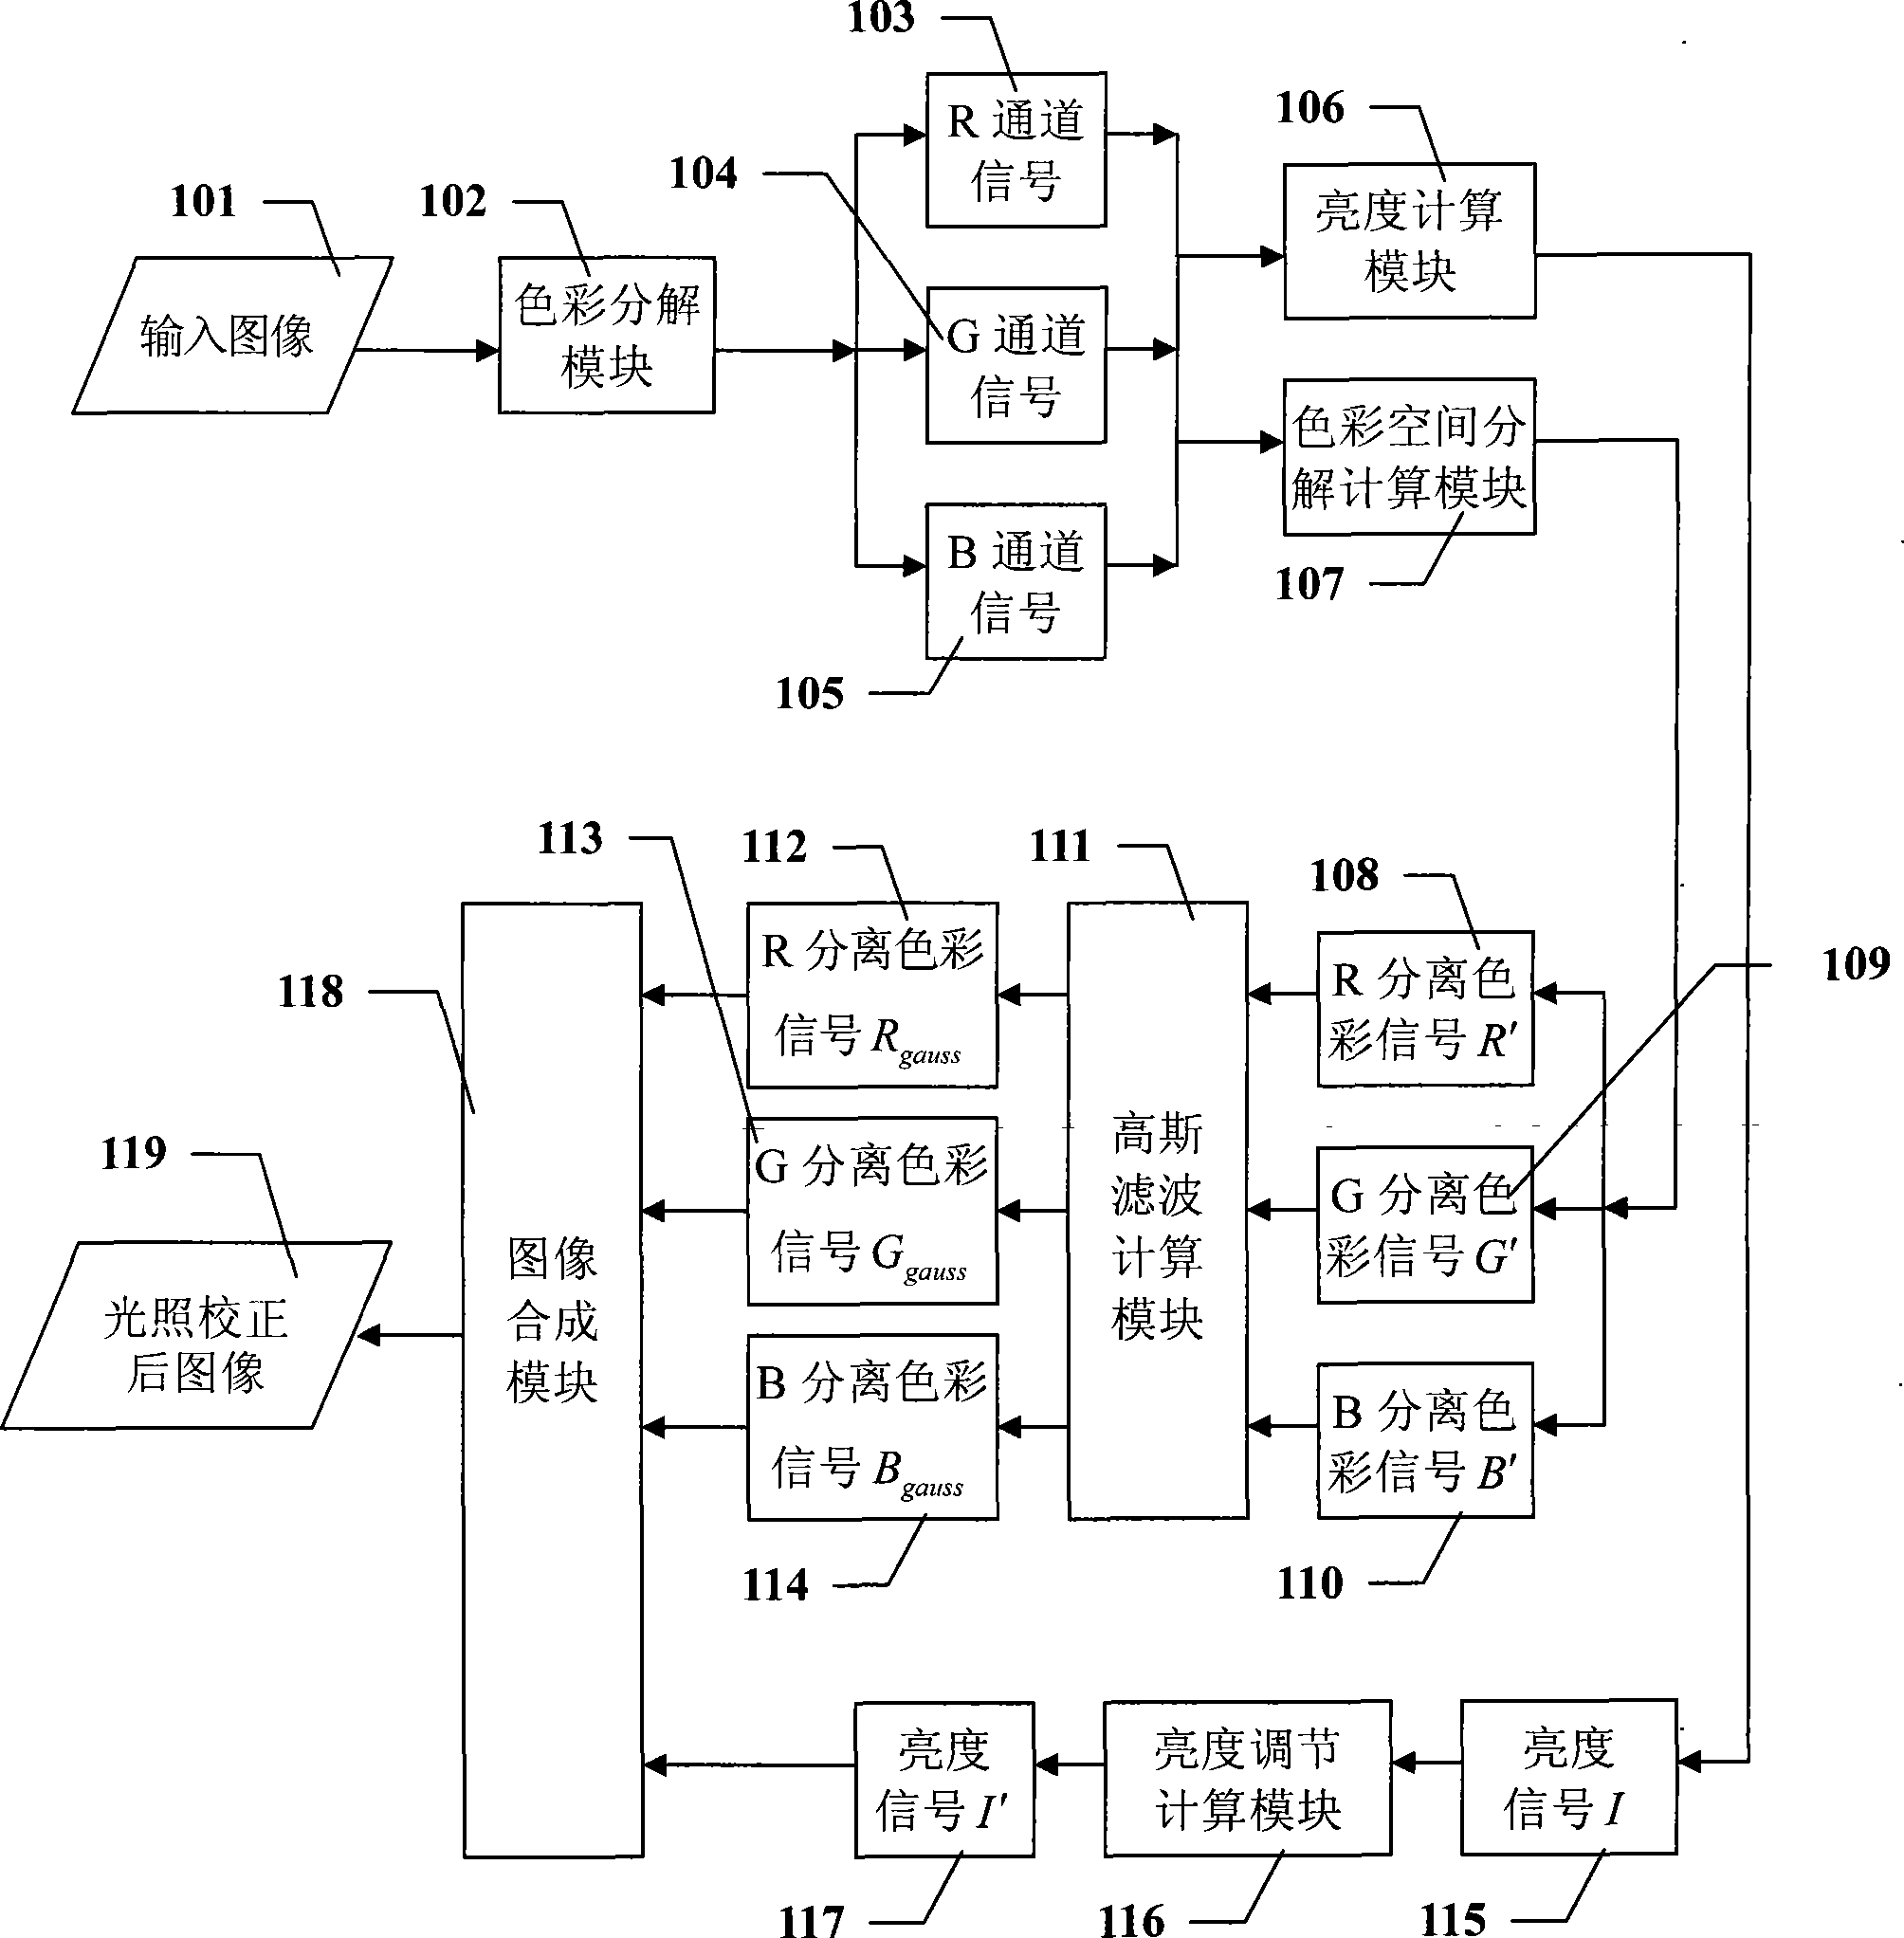 Image irradiation correcting system based on color domain mapping